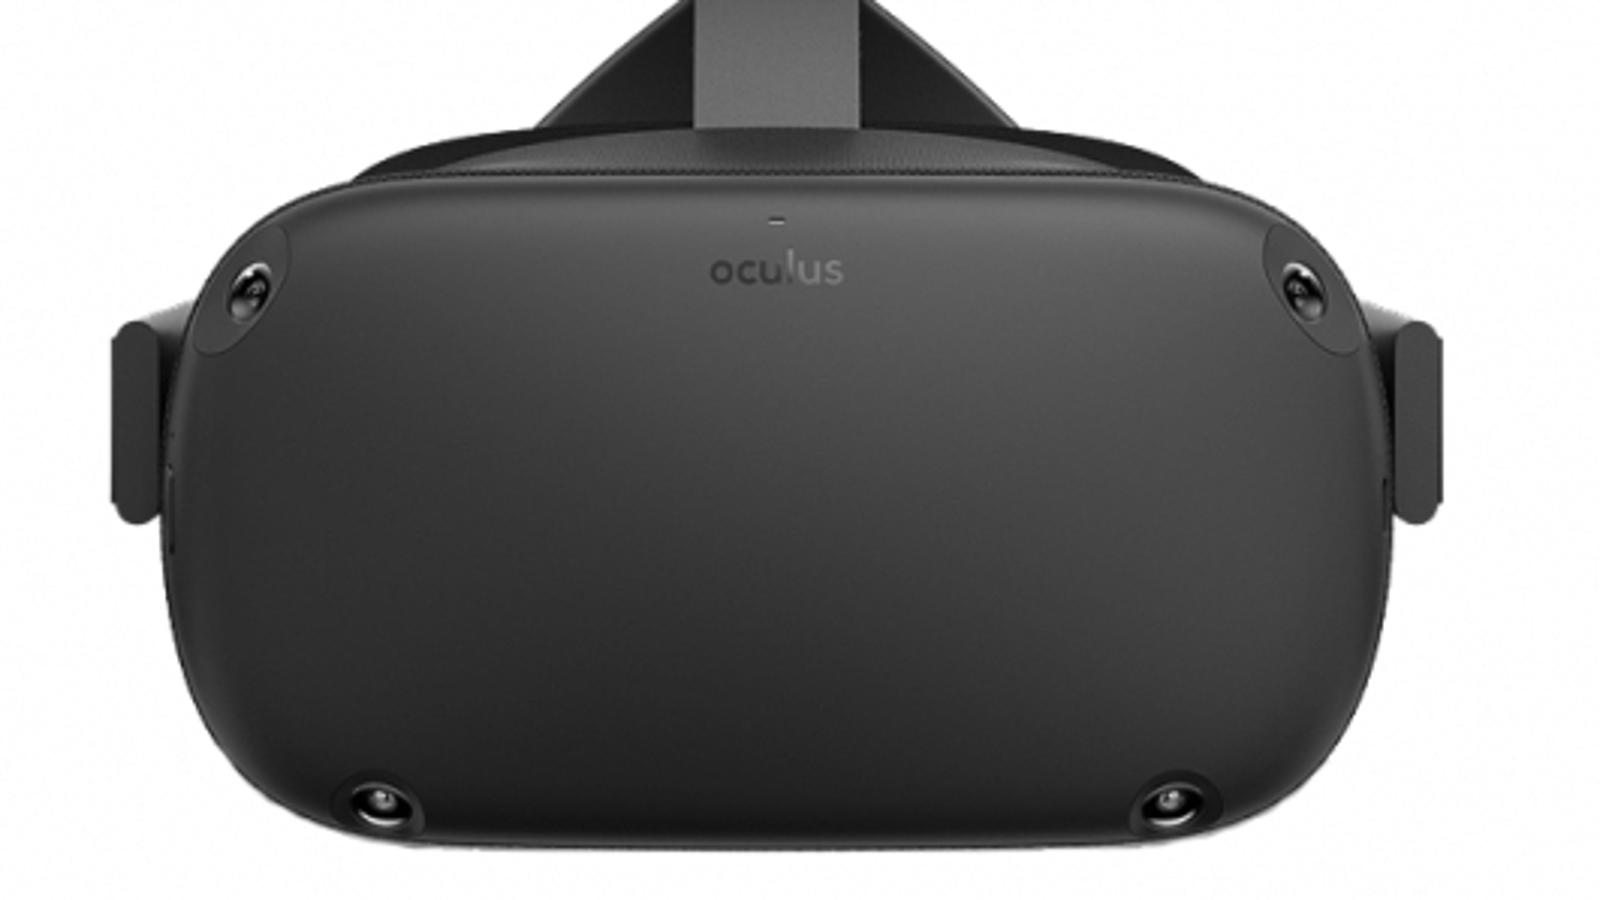 Facebook's latest PC-powered VR headset is the enhanced Oculus Rift S